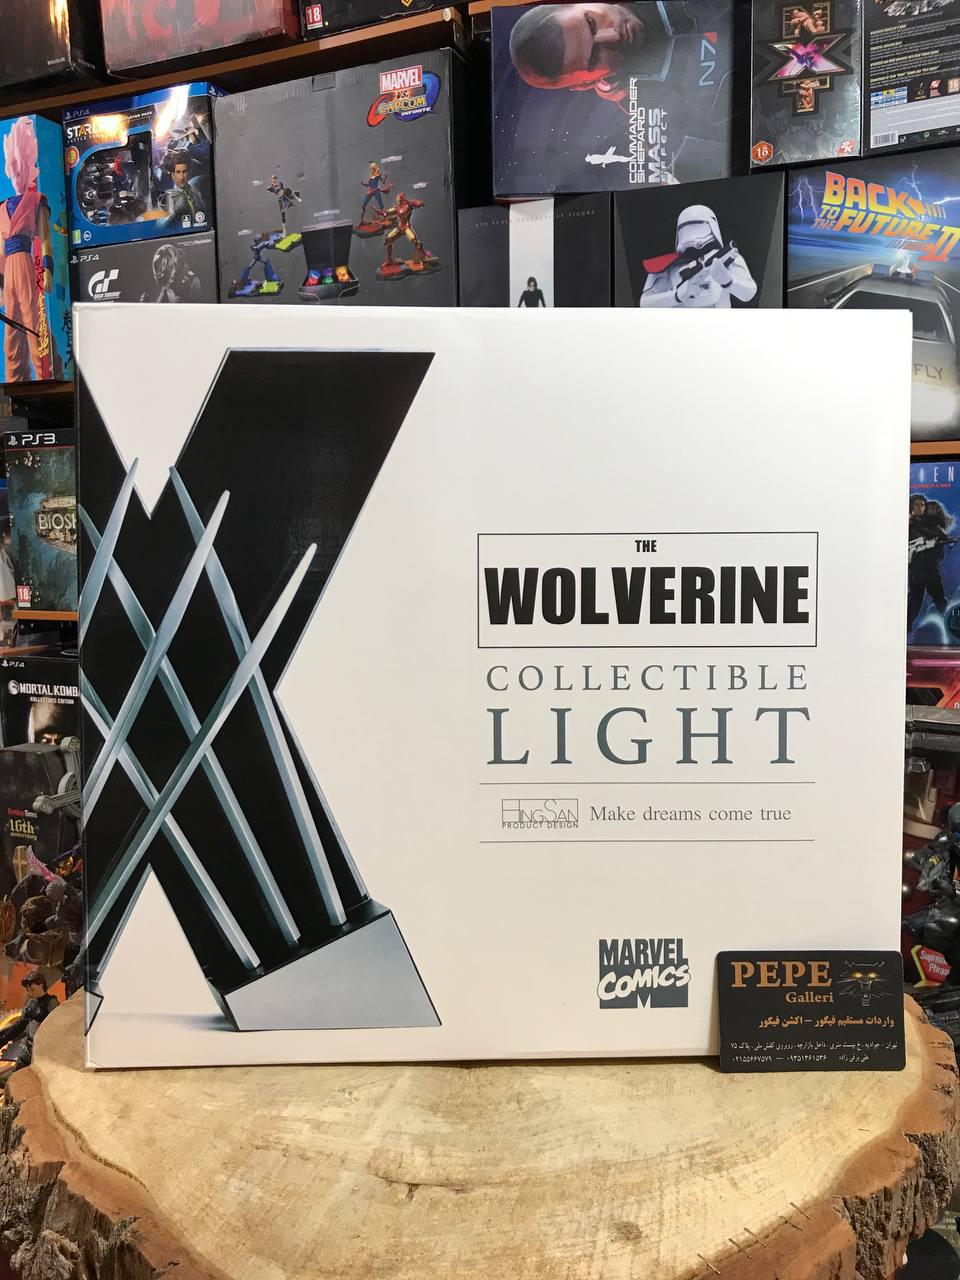 HingSan 1/1 Light X-Men Wolverine Replica Claws Weapons Collectible LED DESK Light